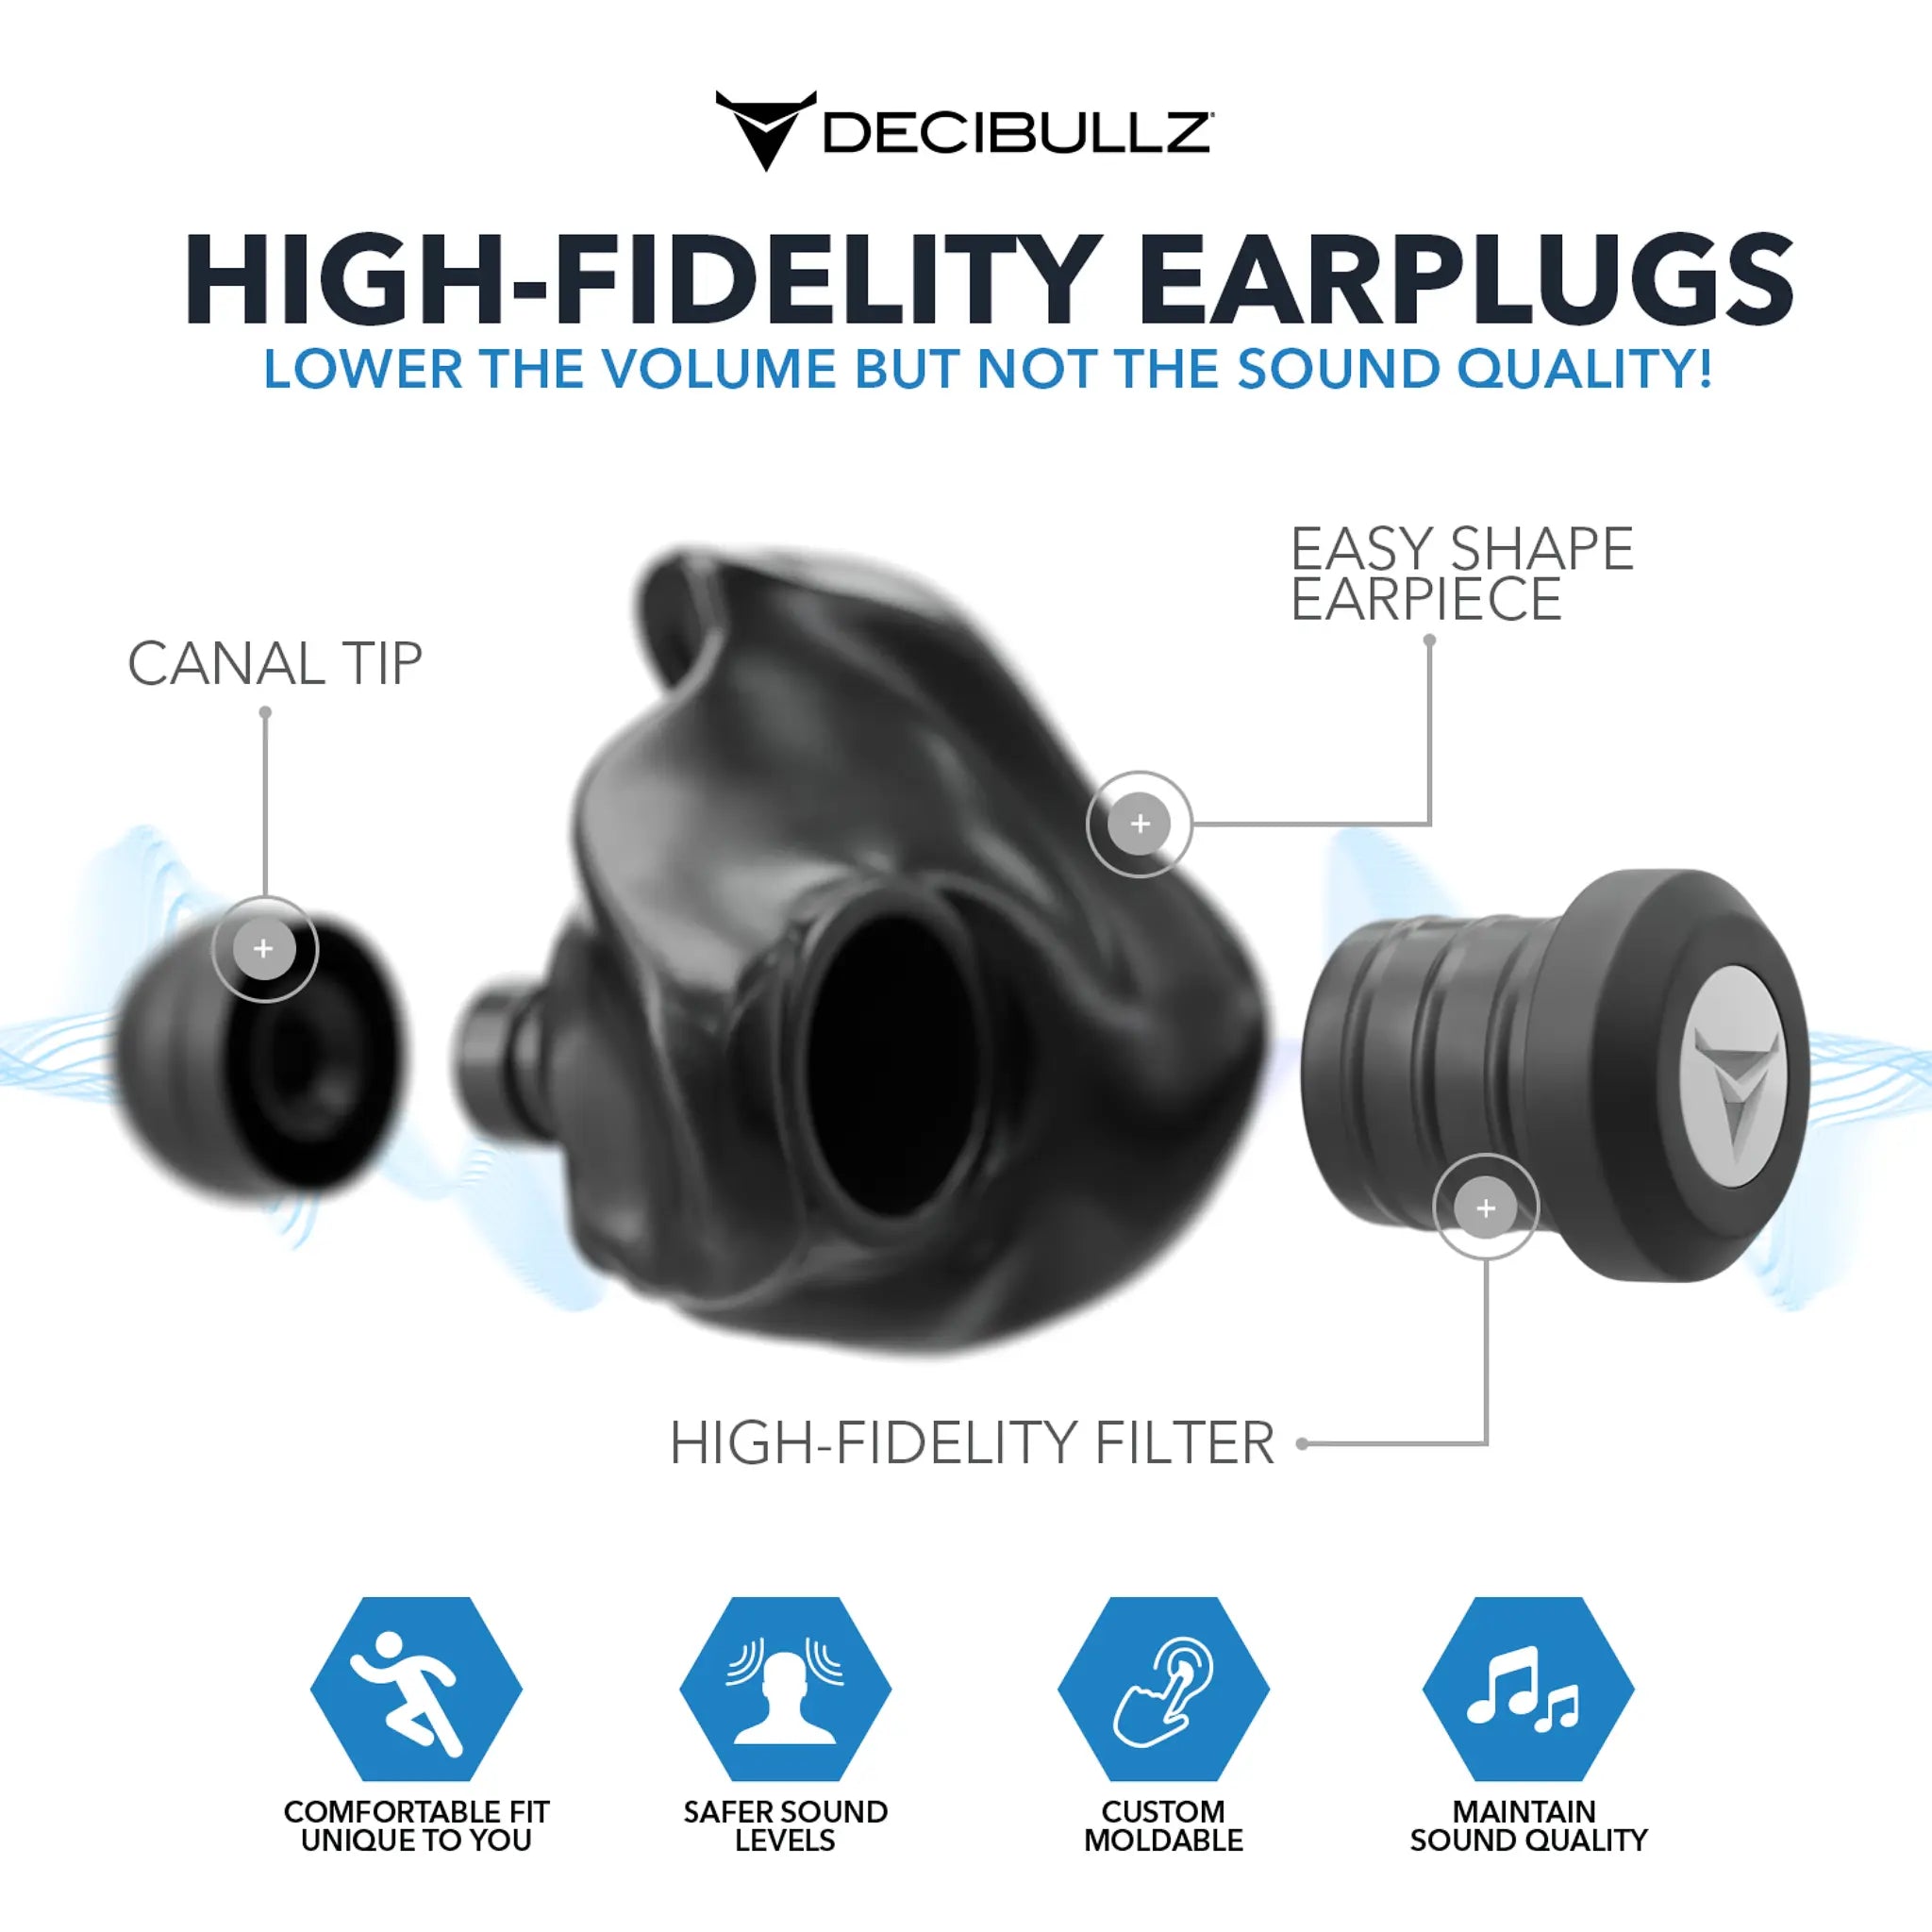 Custom Molded High-Fidelity Earplugs for Concerts, Musicians, Events, and Noise Sensitivity